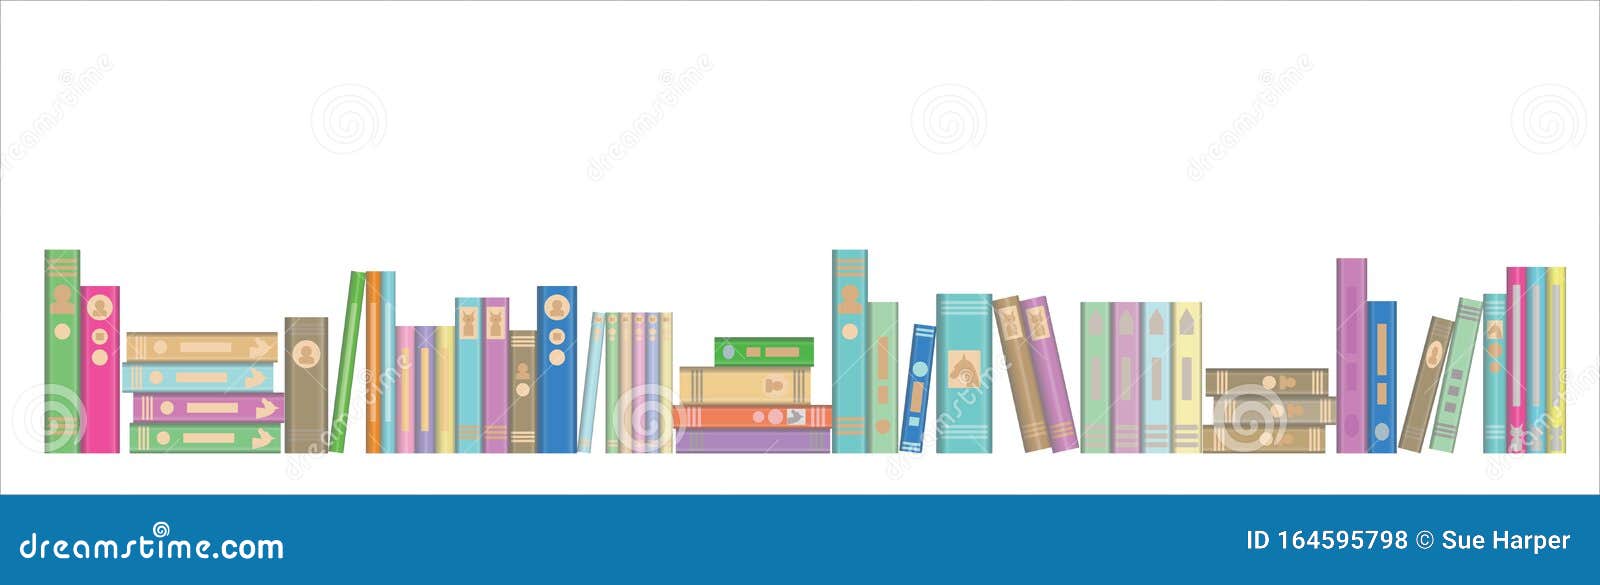 library books in banner